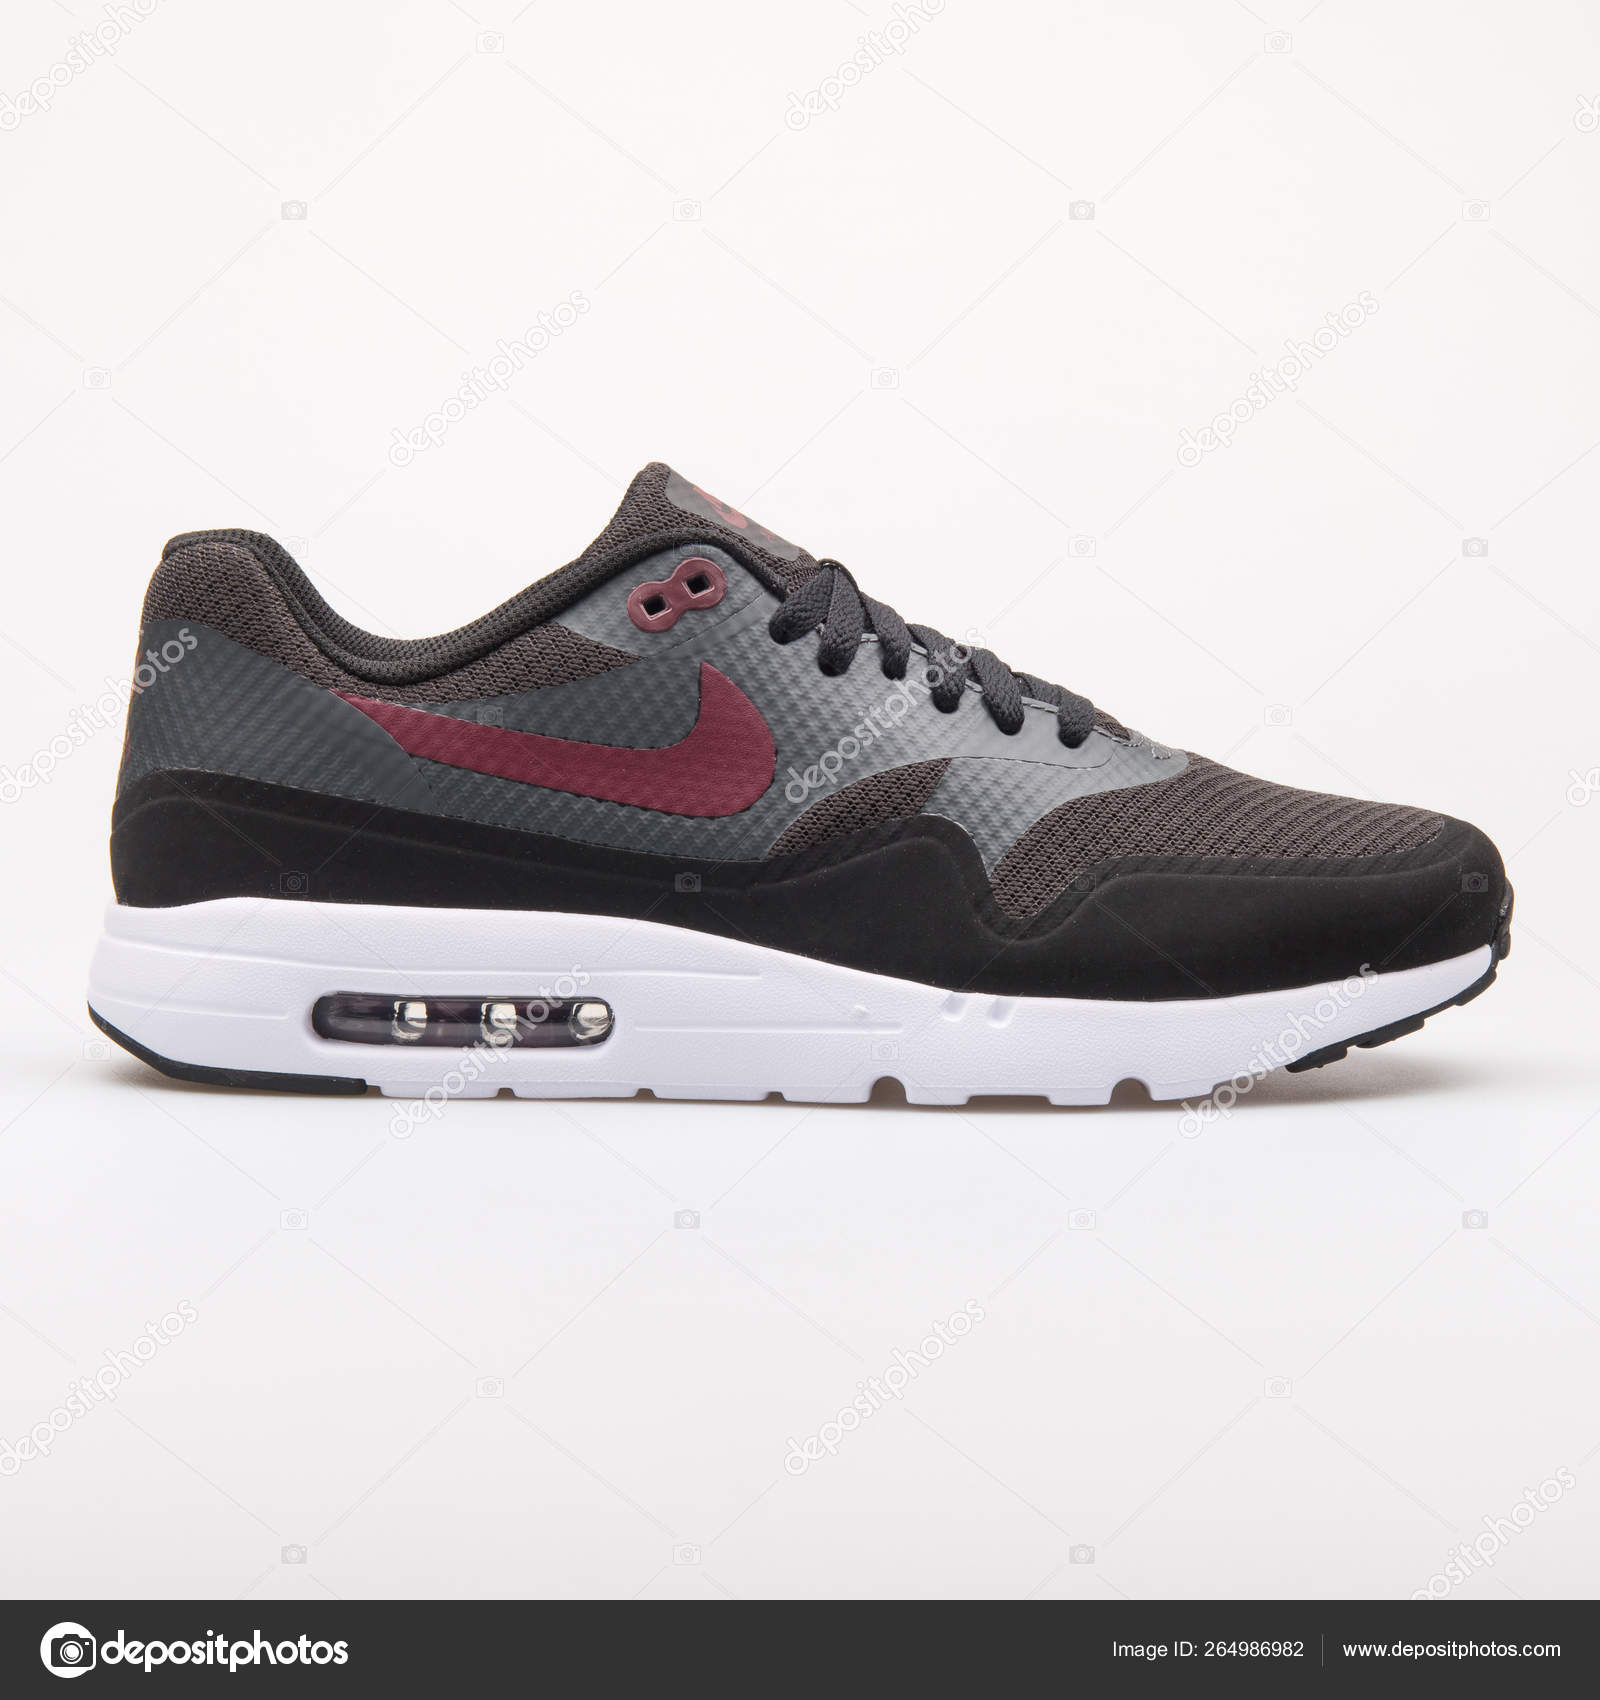 houding Wijzer Zwijgend Nike Air Max 1 Ultra Essential black and maroon sneaker – Stock Editorial  Photo © xMarshallfilms #264986982